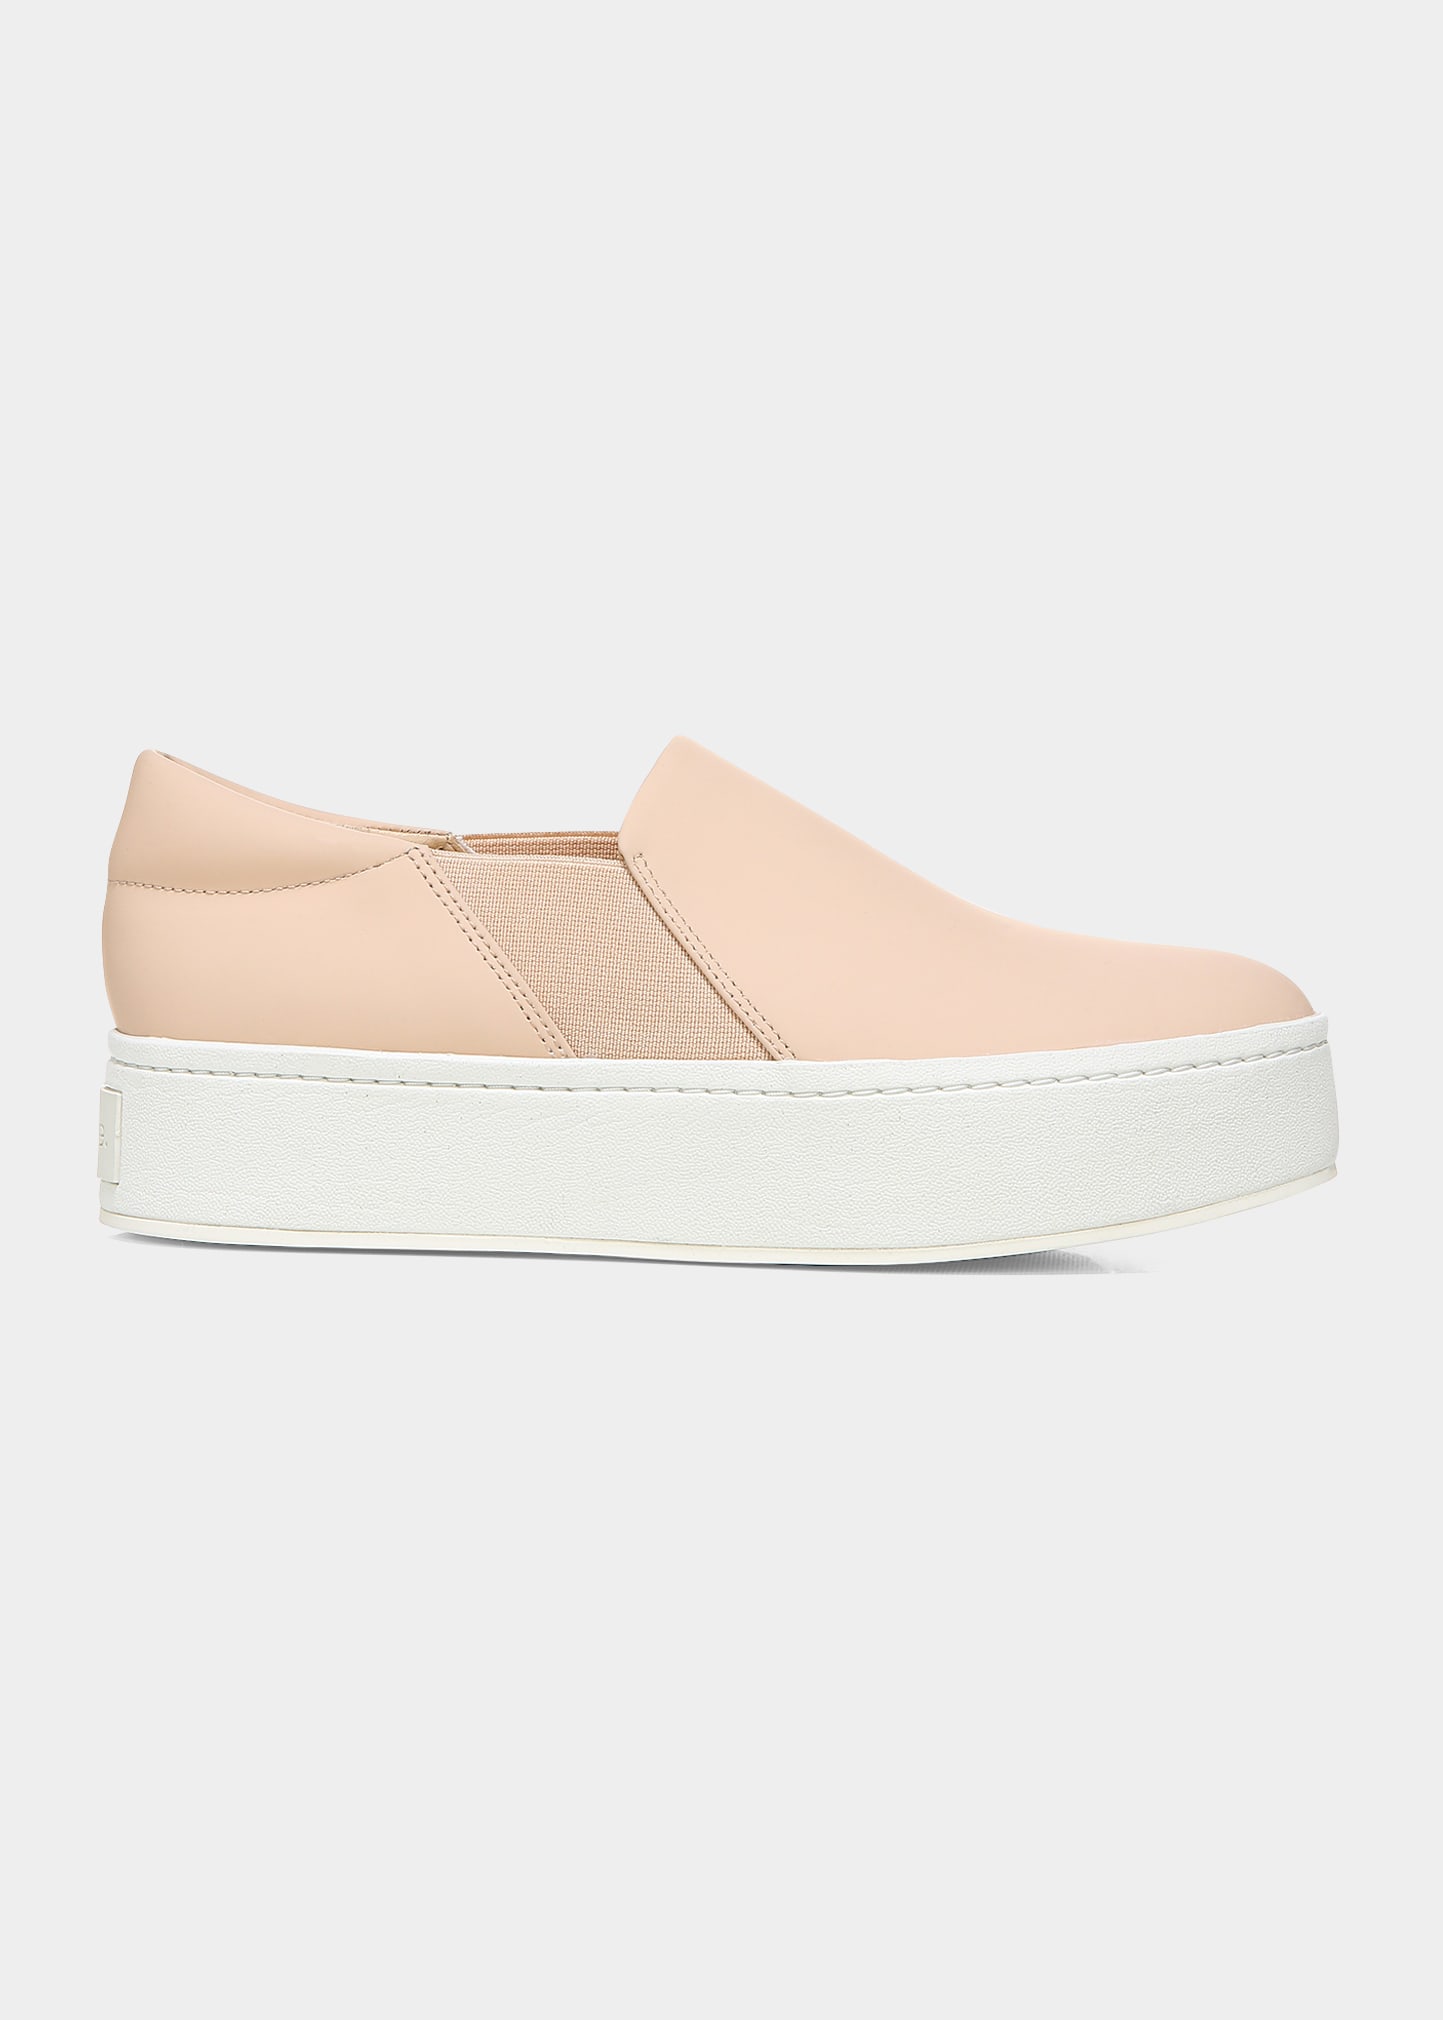 Vince Warren Leather Slip-on Skater Sneakers In Rosesecco